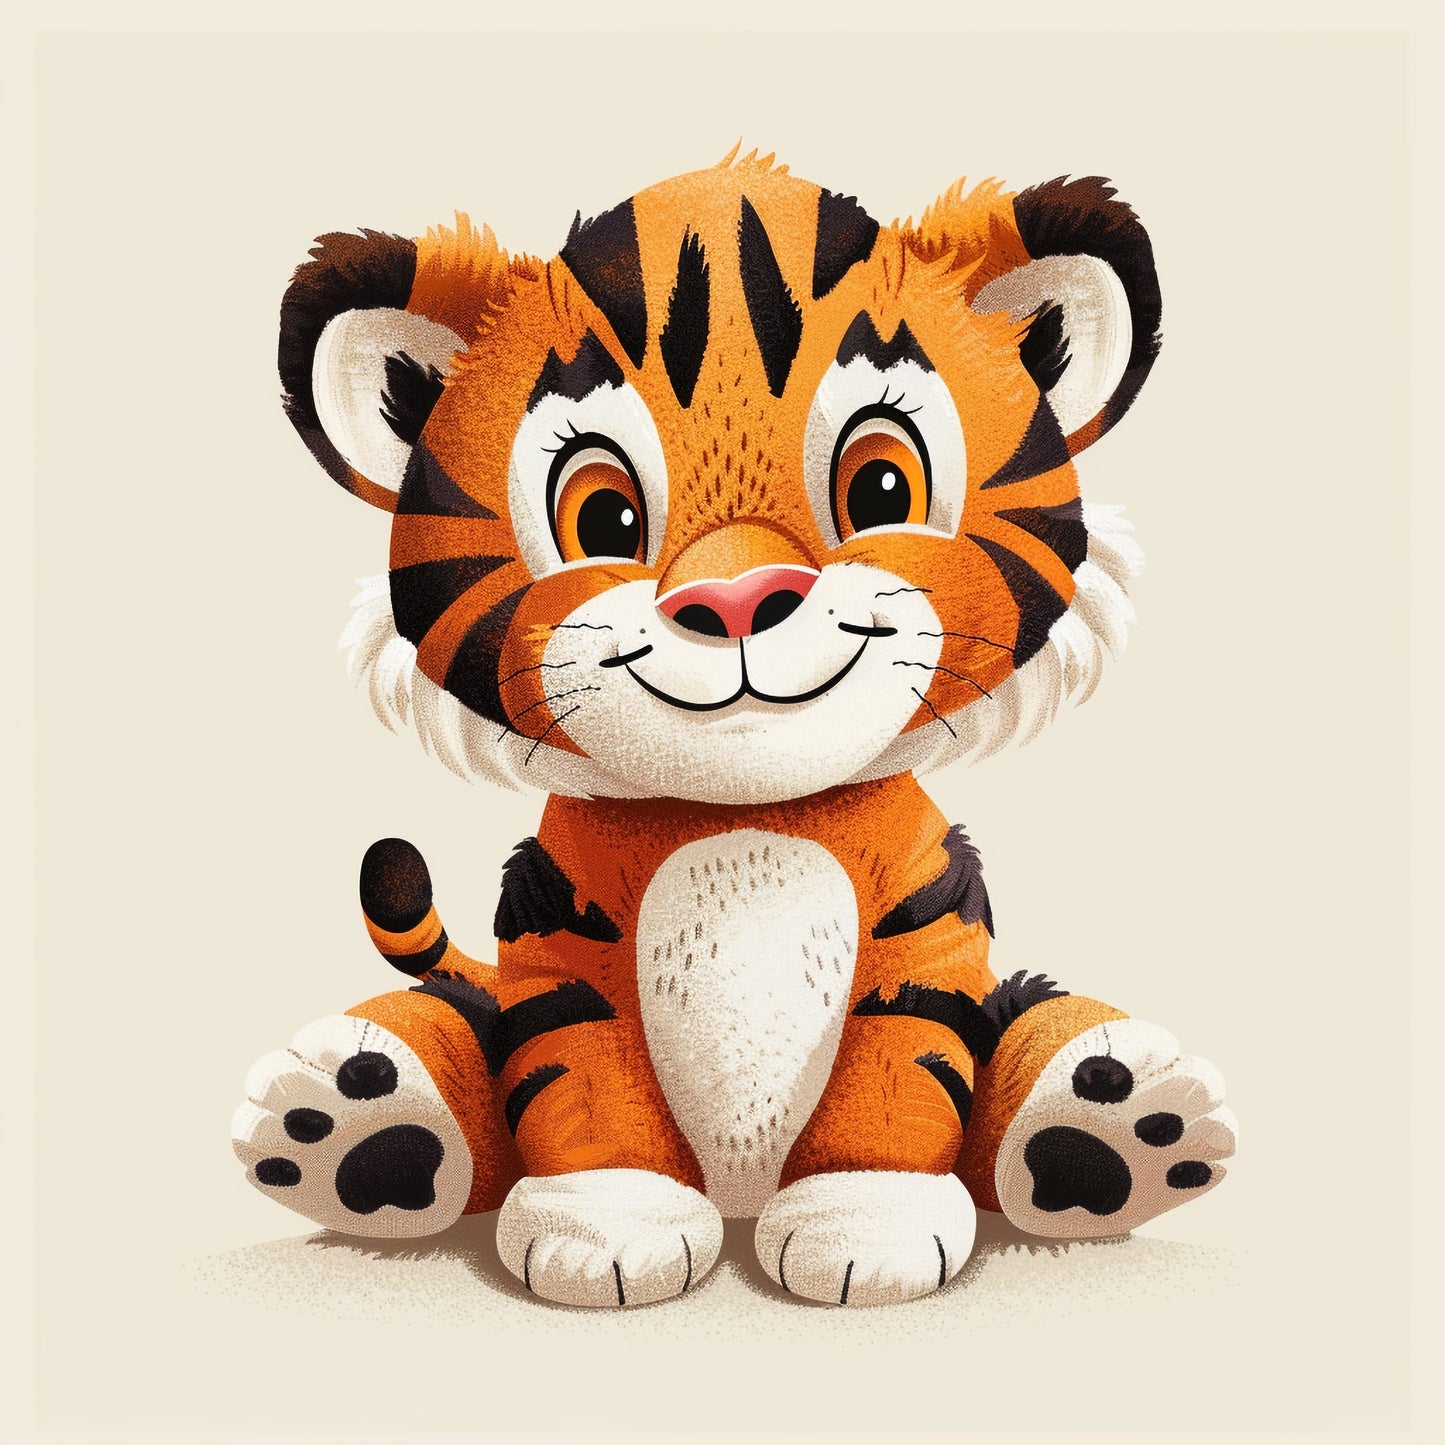 Adorable Embroidered Baby Tiger Illustration with a Smile